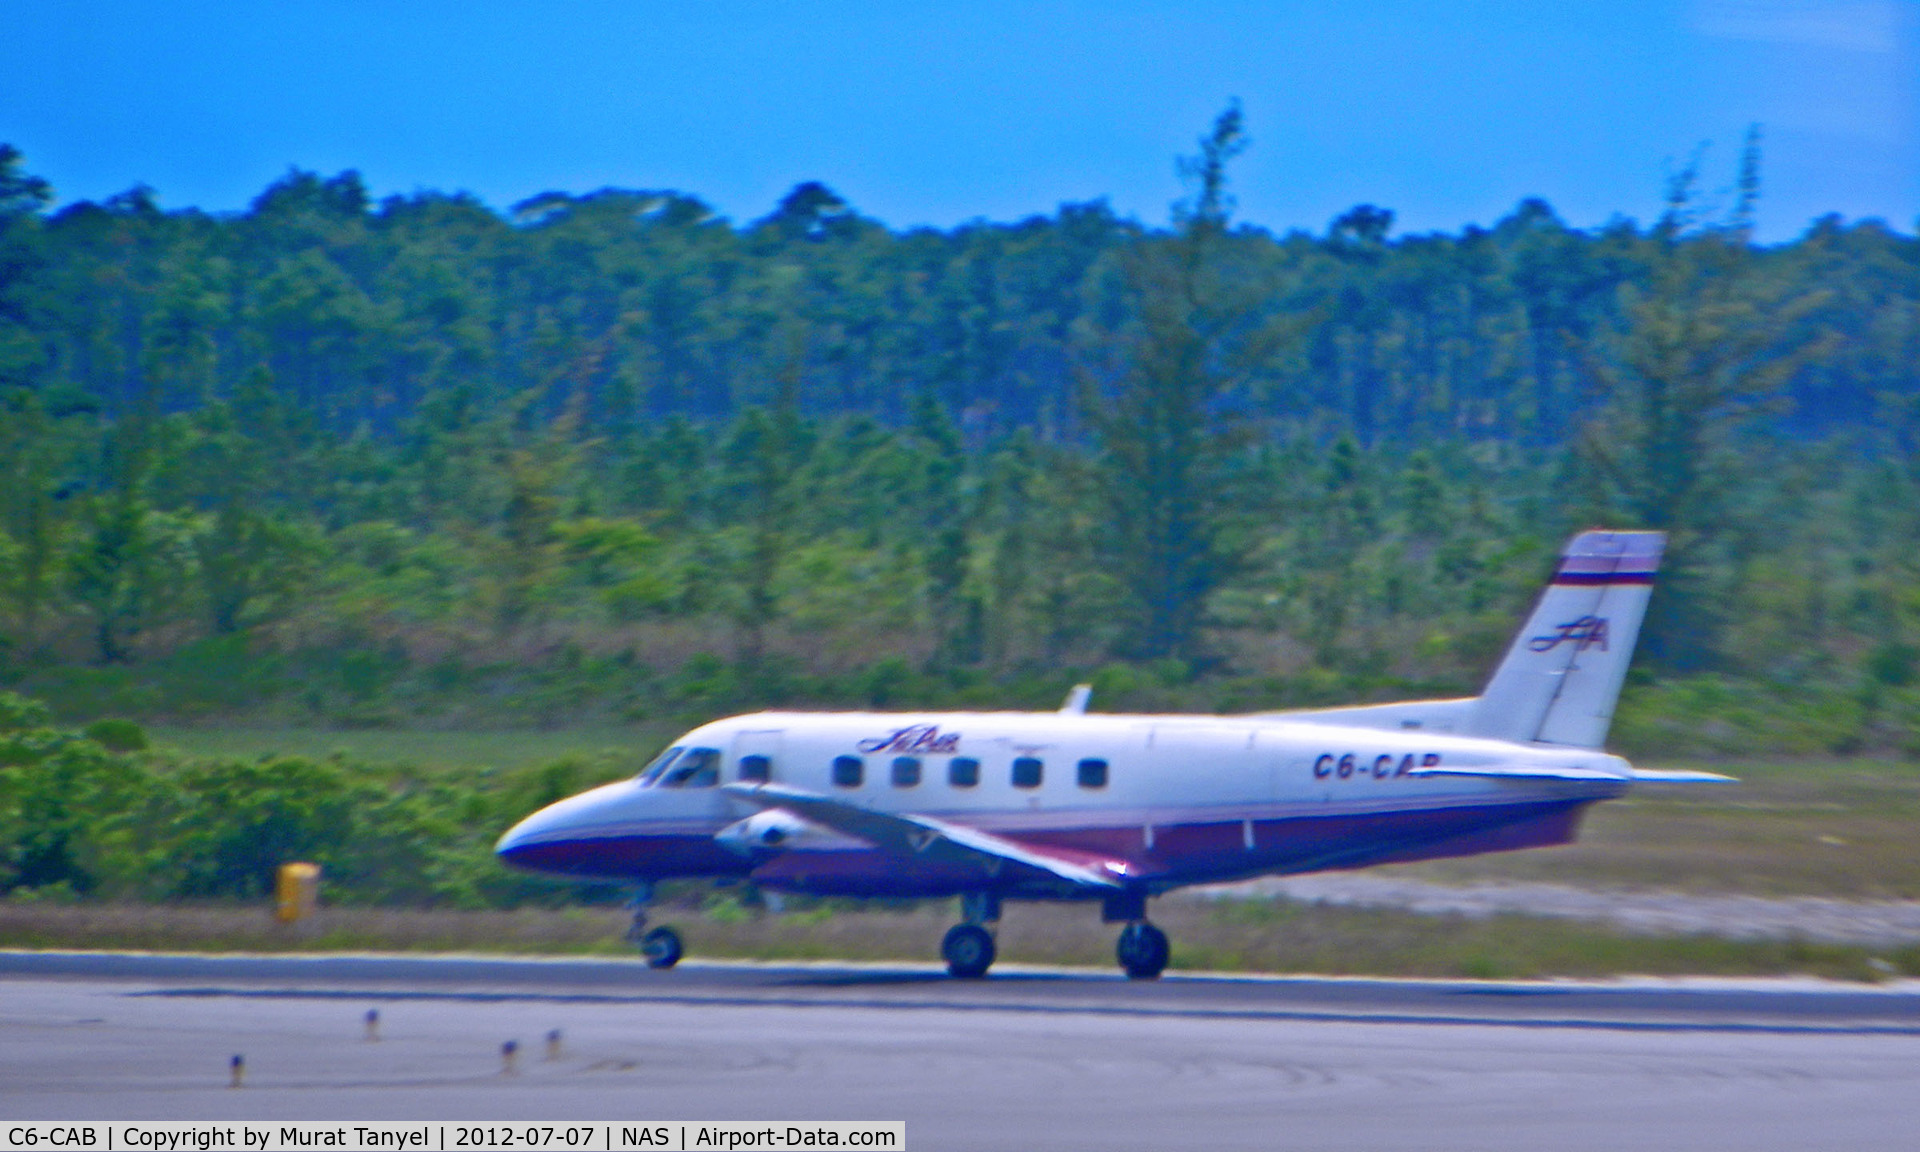 C6-CAB, 1978 Embraer EMB-110P1 Bandeirante C/N 110198, Right after touch-down at NAS